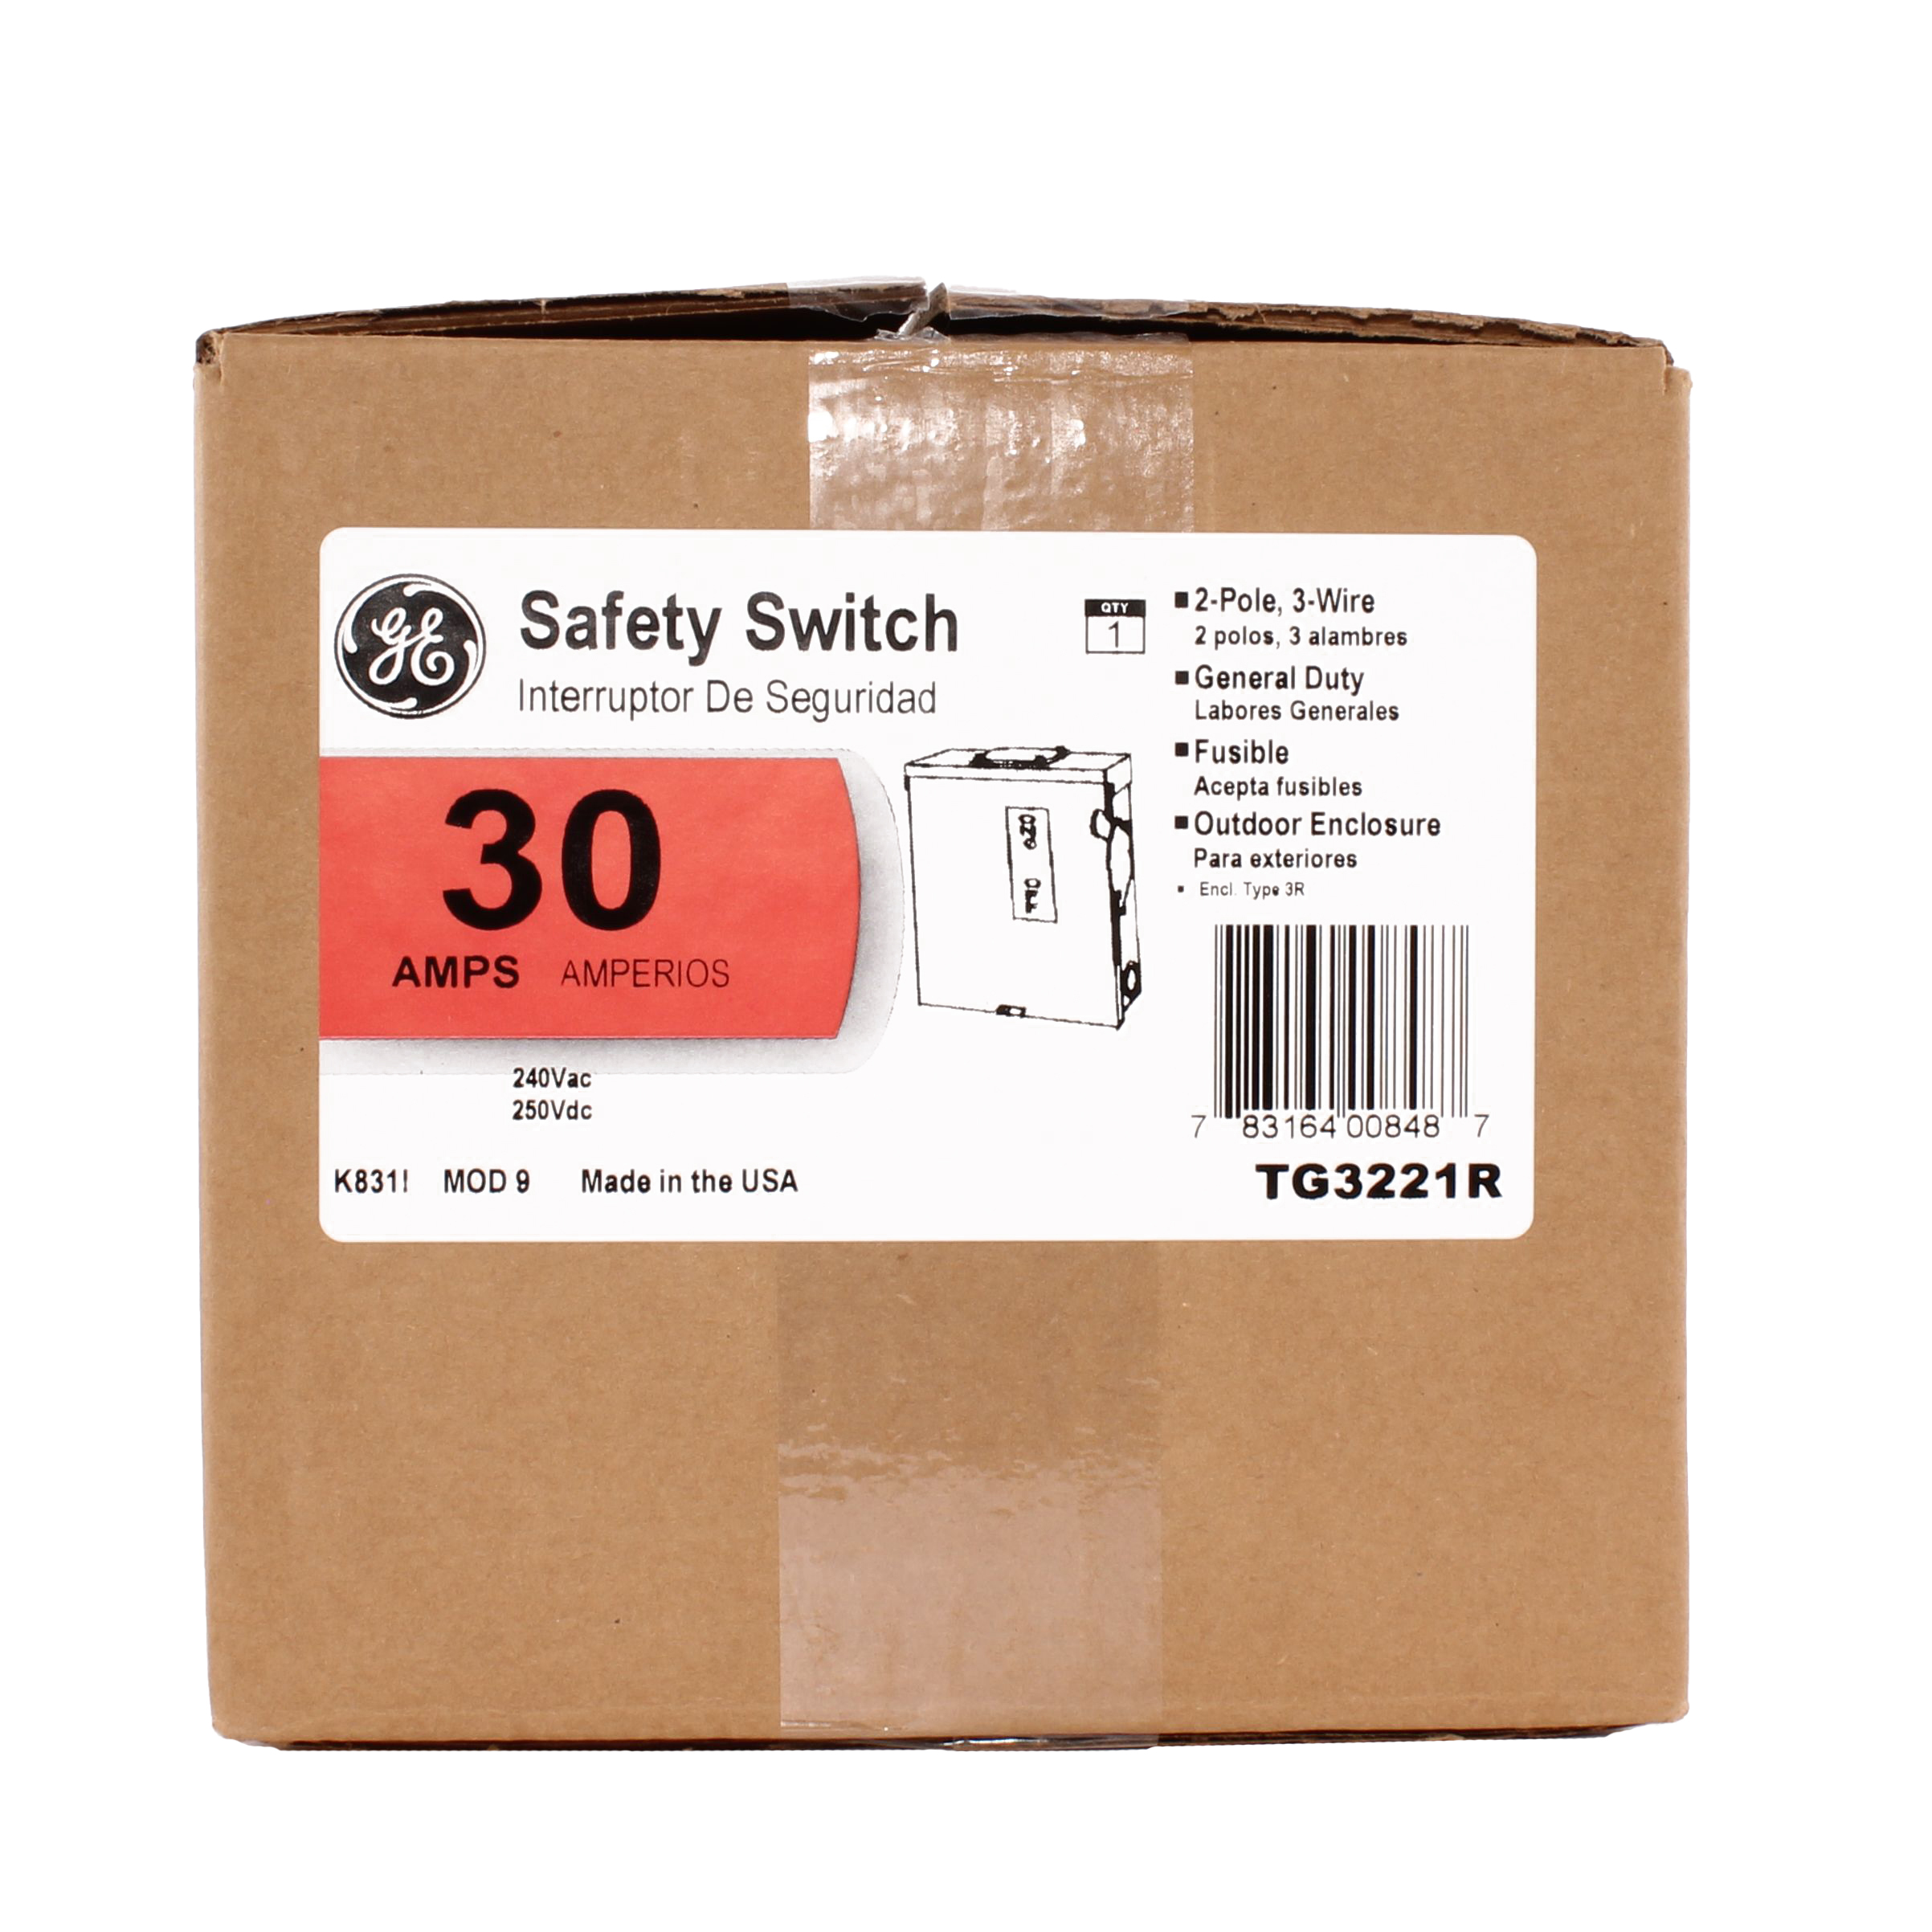 GEE TG3221R 30A 240V 2P 3W 1PH FUSIBLE 3R GENERAL DUTY SAFETY SWITCH